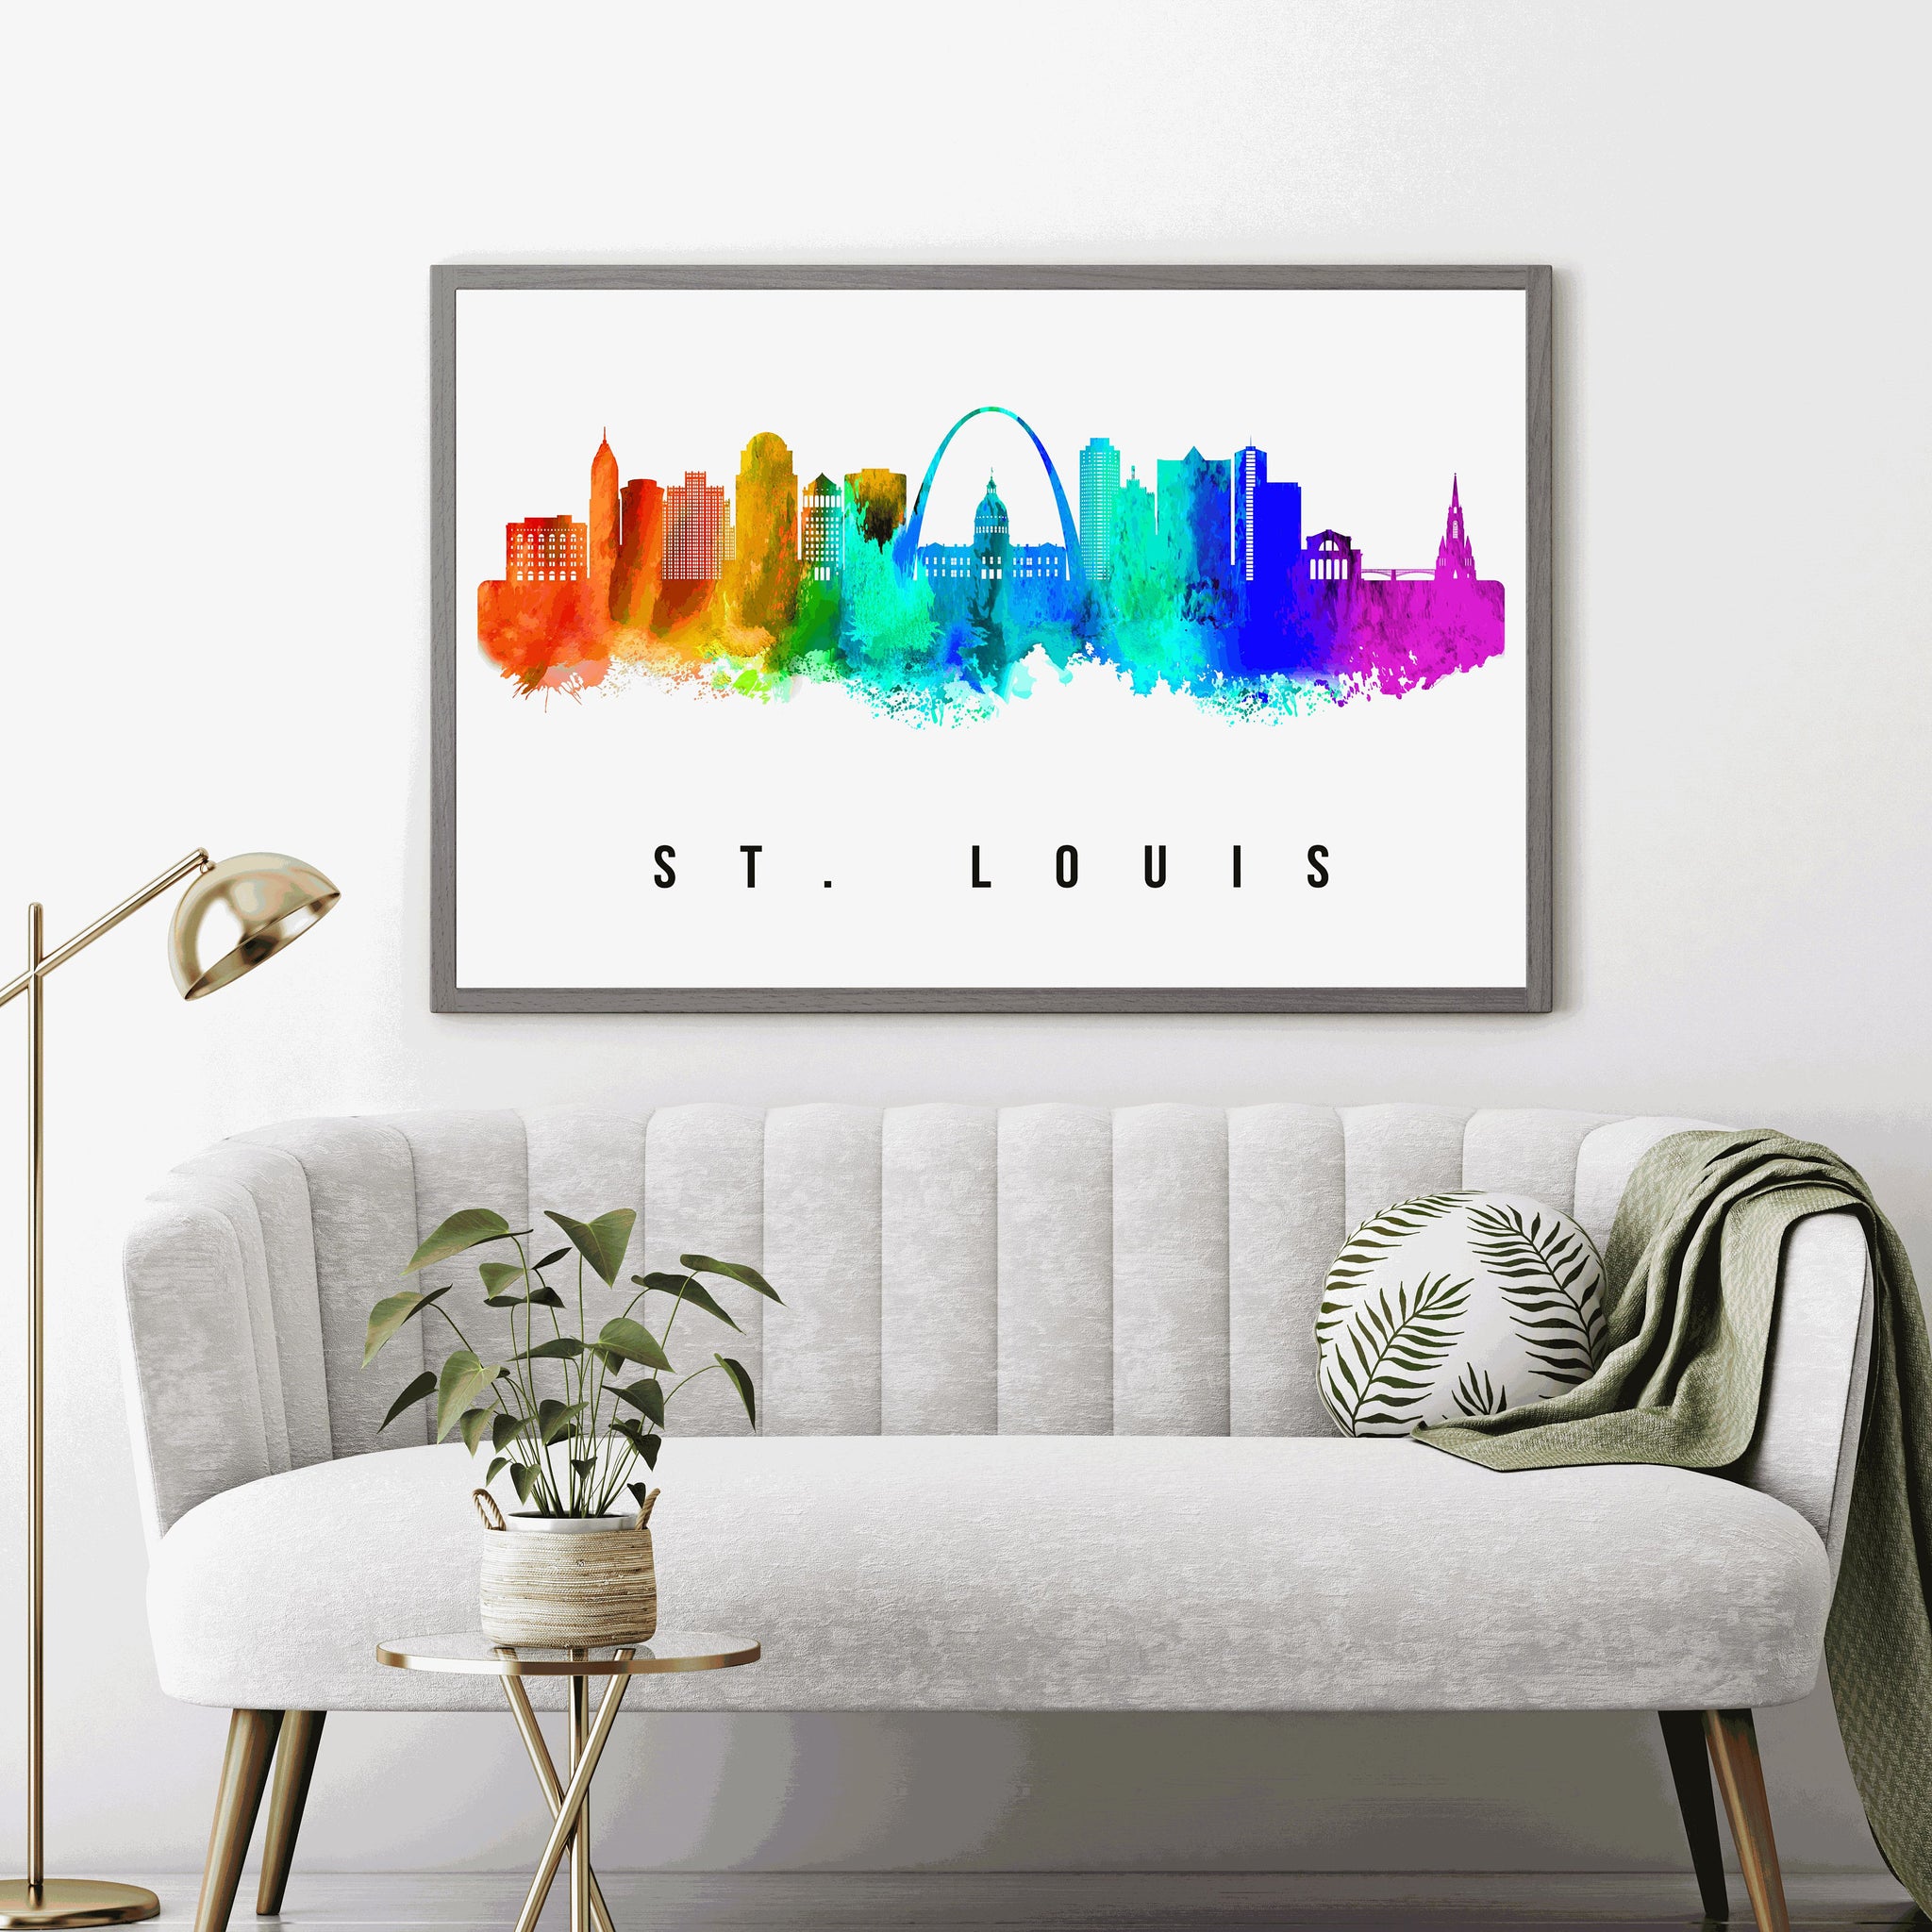 St.Louis - Missouri Skyline Poster, St.Louis Cityscape Painting, St.Louis - Missouri Landmark and Cityscape Print, Home and Office Wall Art